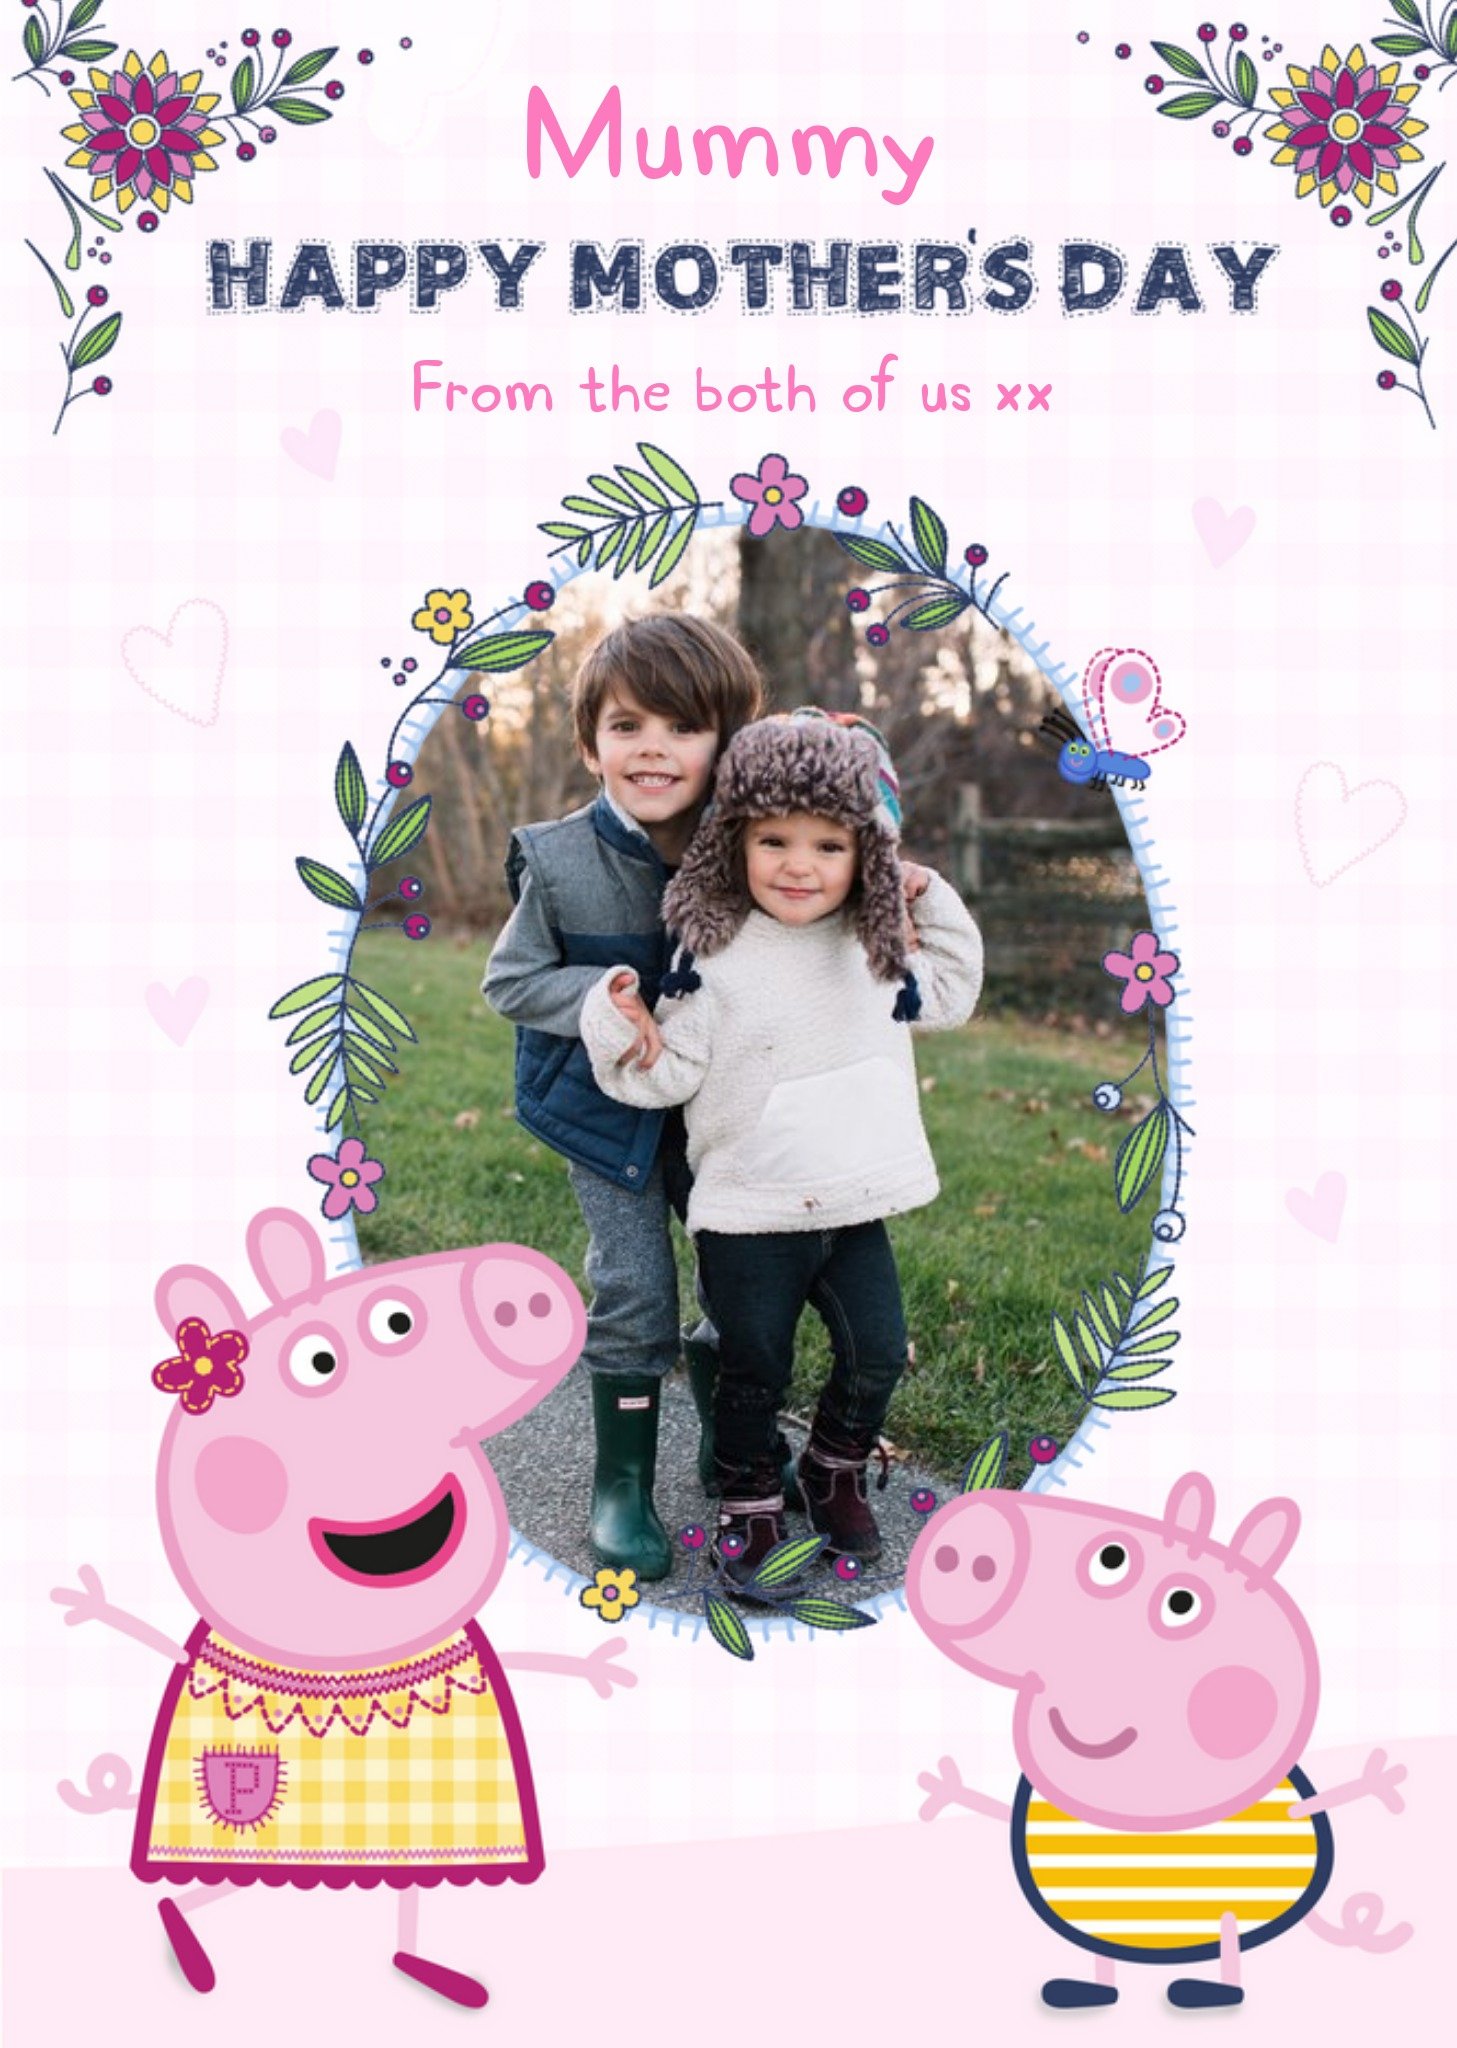 Mother's Day Card - Peppa Pig - Mummy - Photo Upload Card, Large